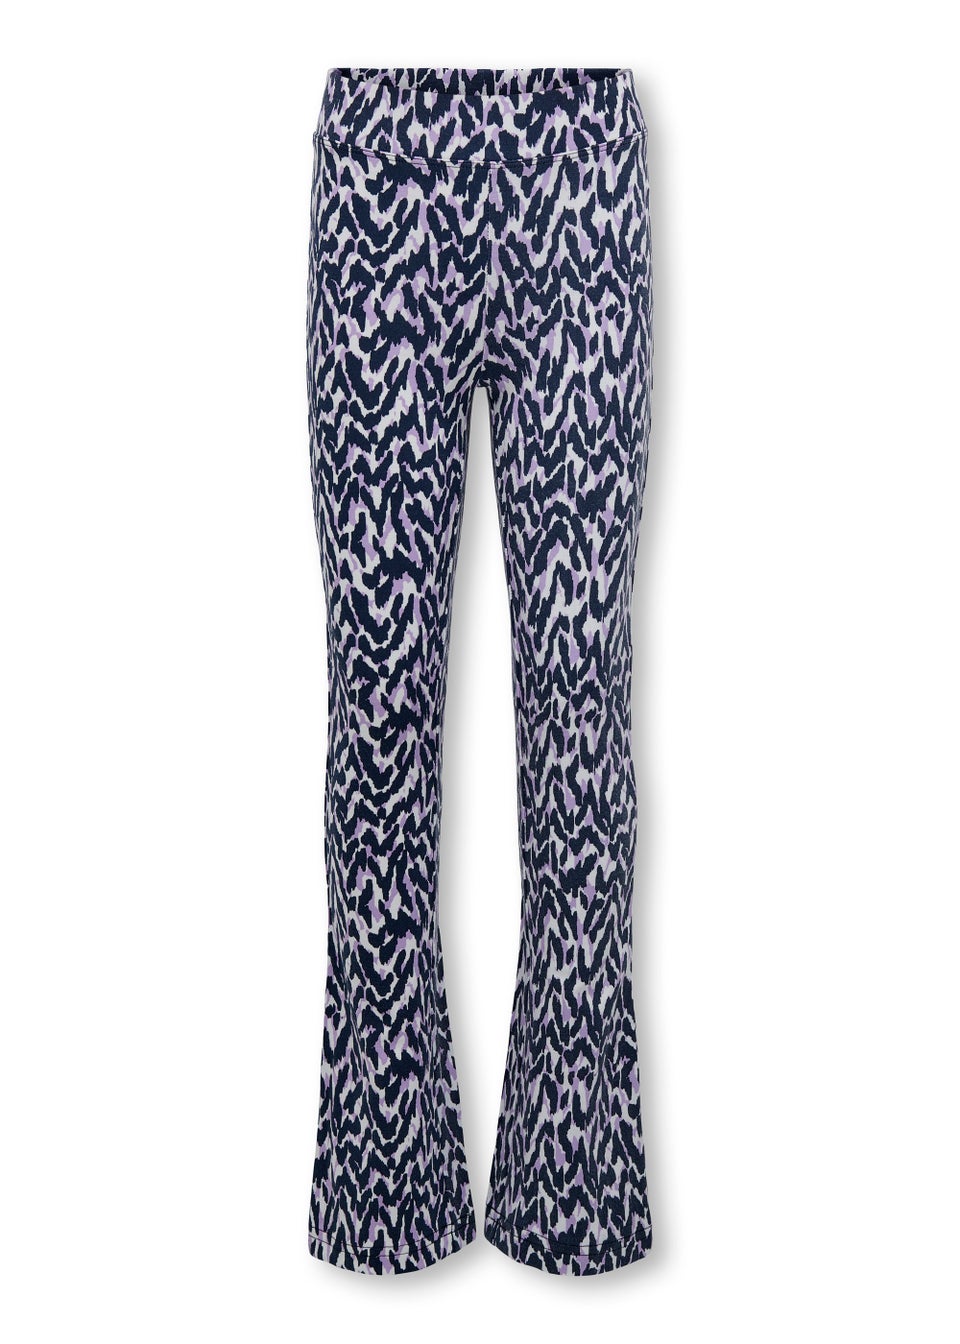 ONLY Kids Purple Print Flared Trousers (6-14yrs)